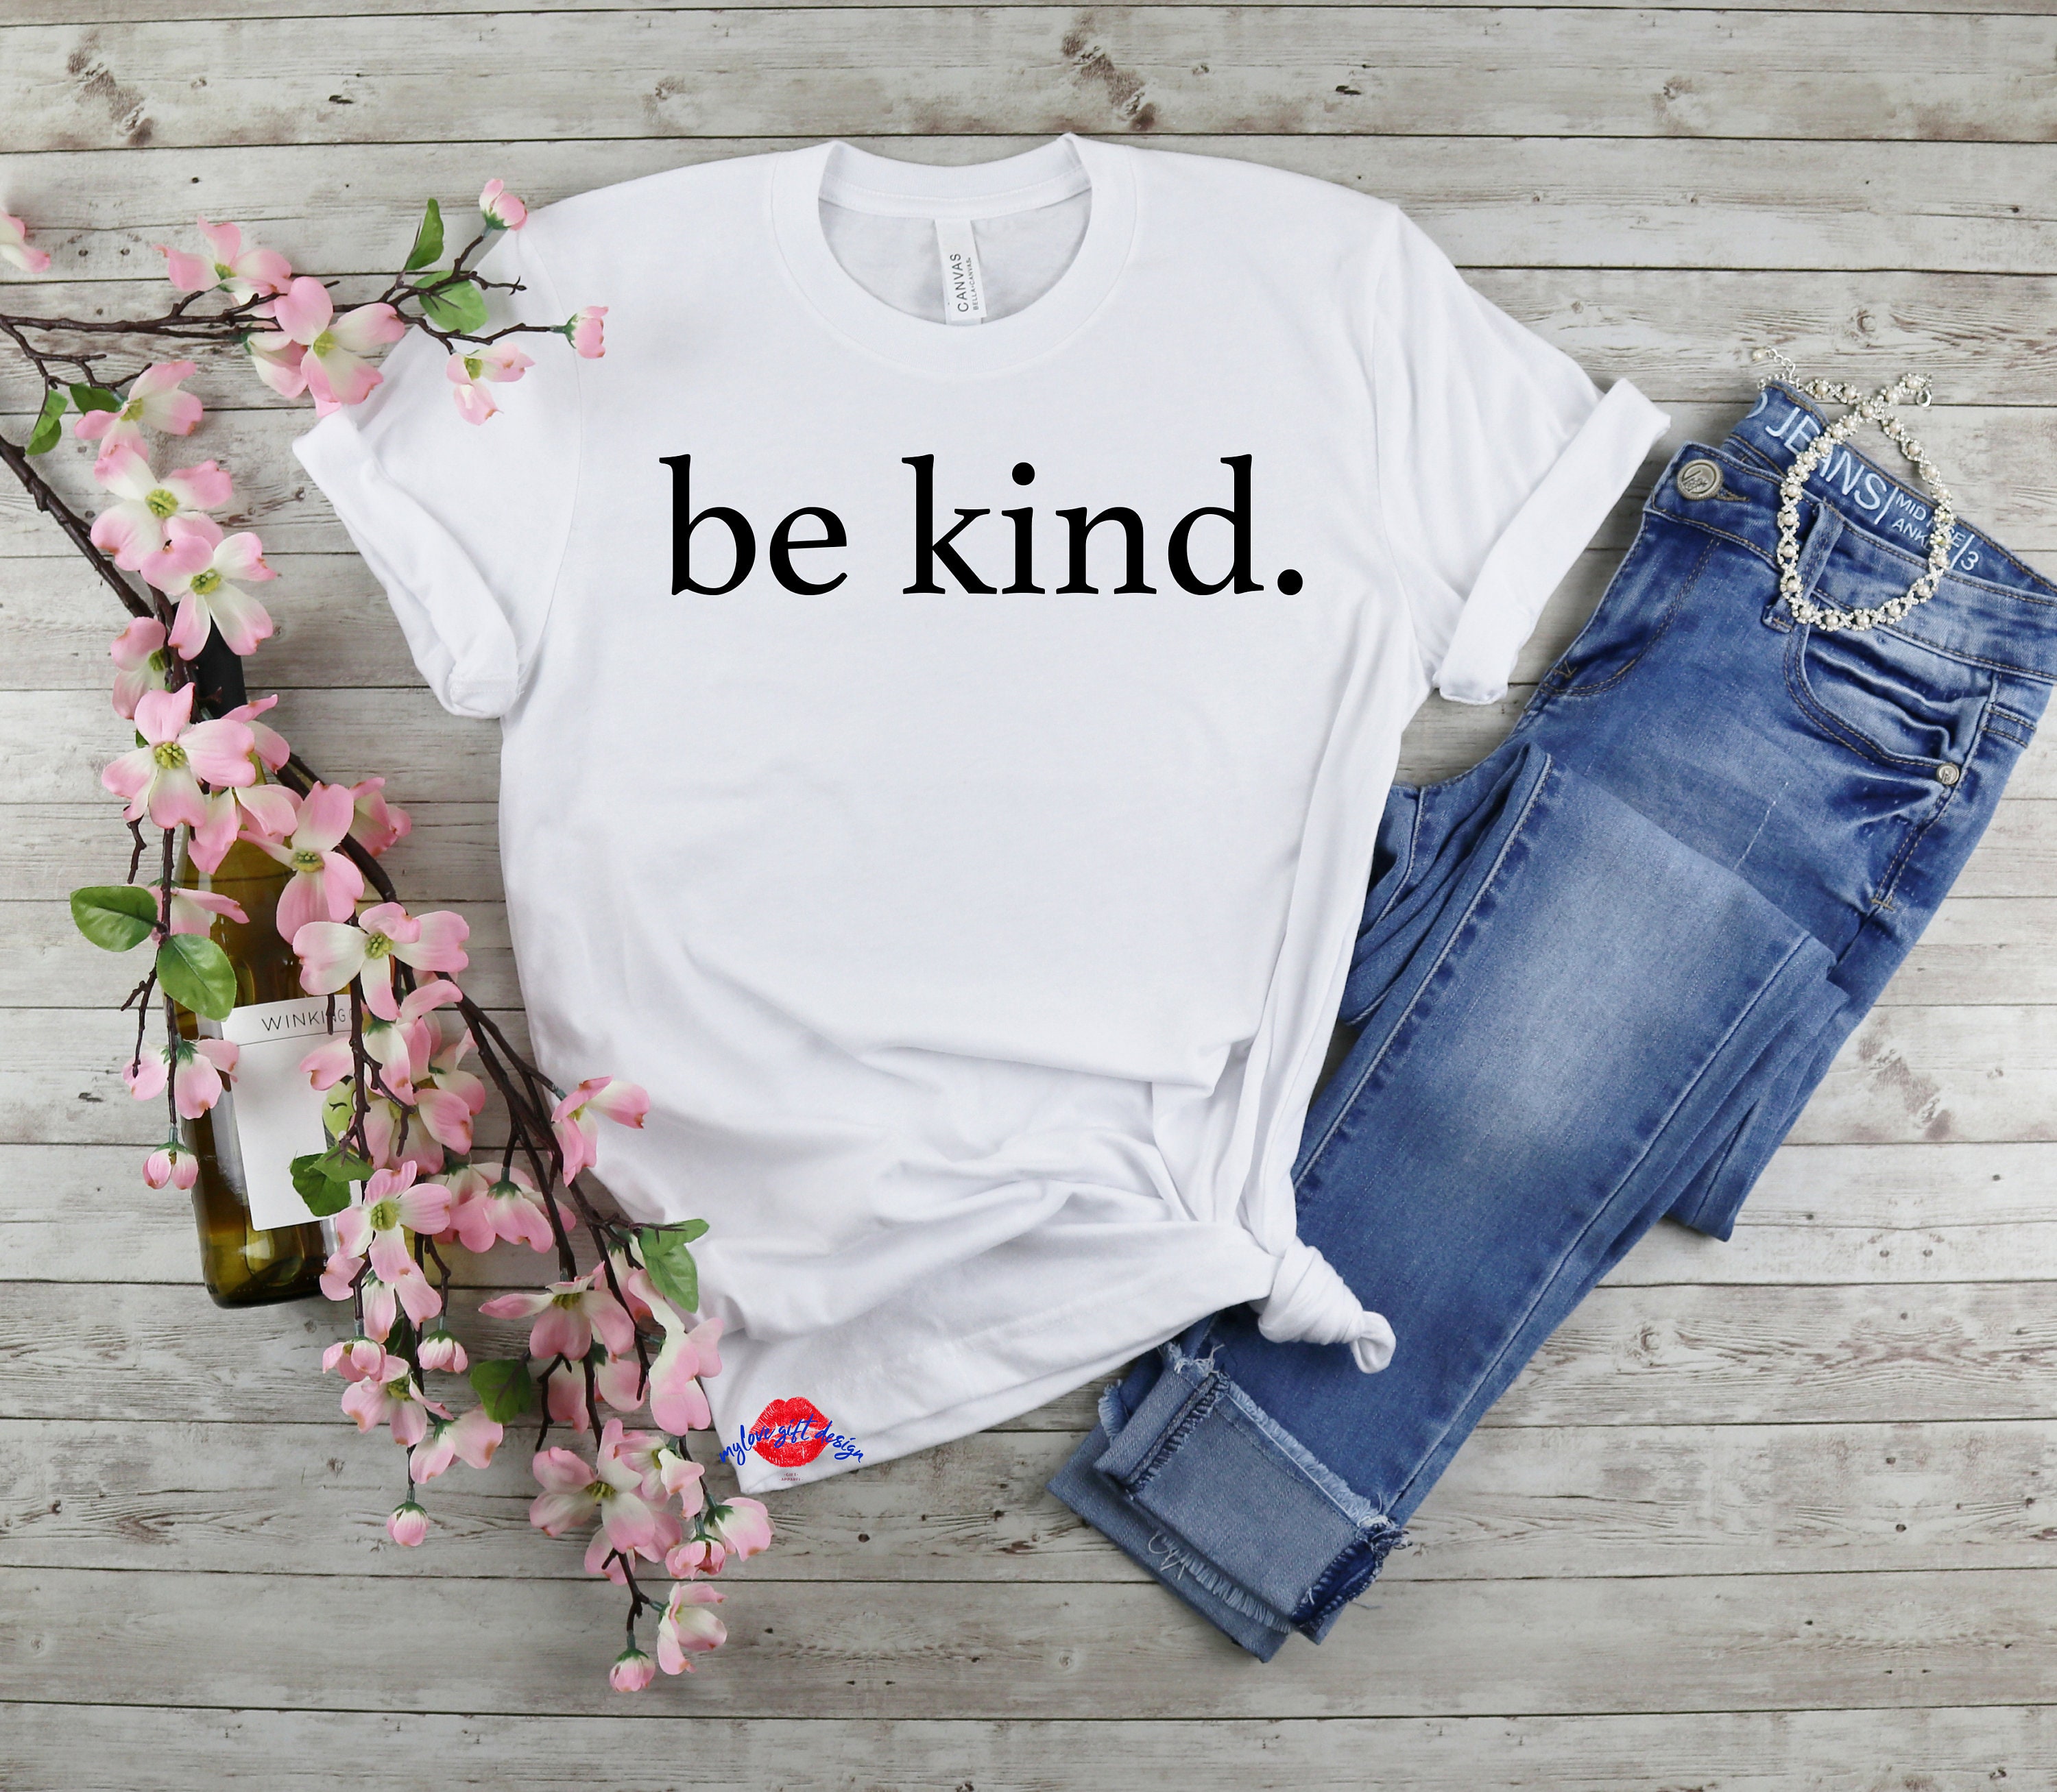 Be Kind Shirt Inspirational Shirt Positivity Quote Tee | Etsy